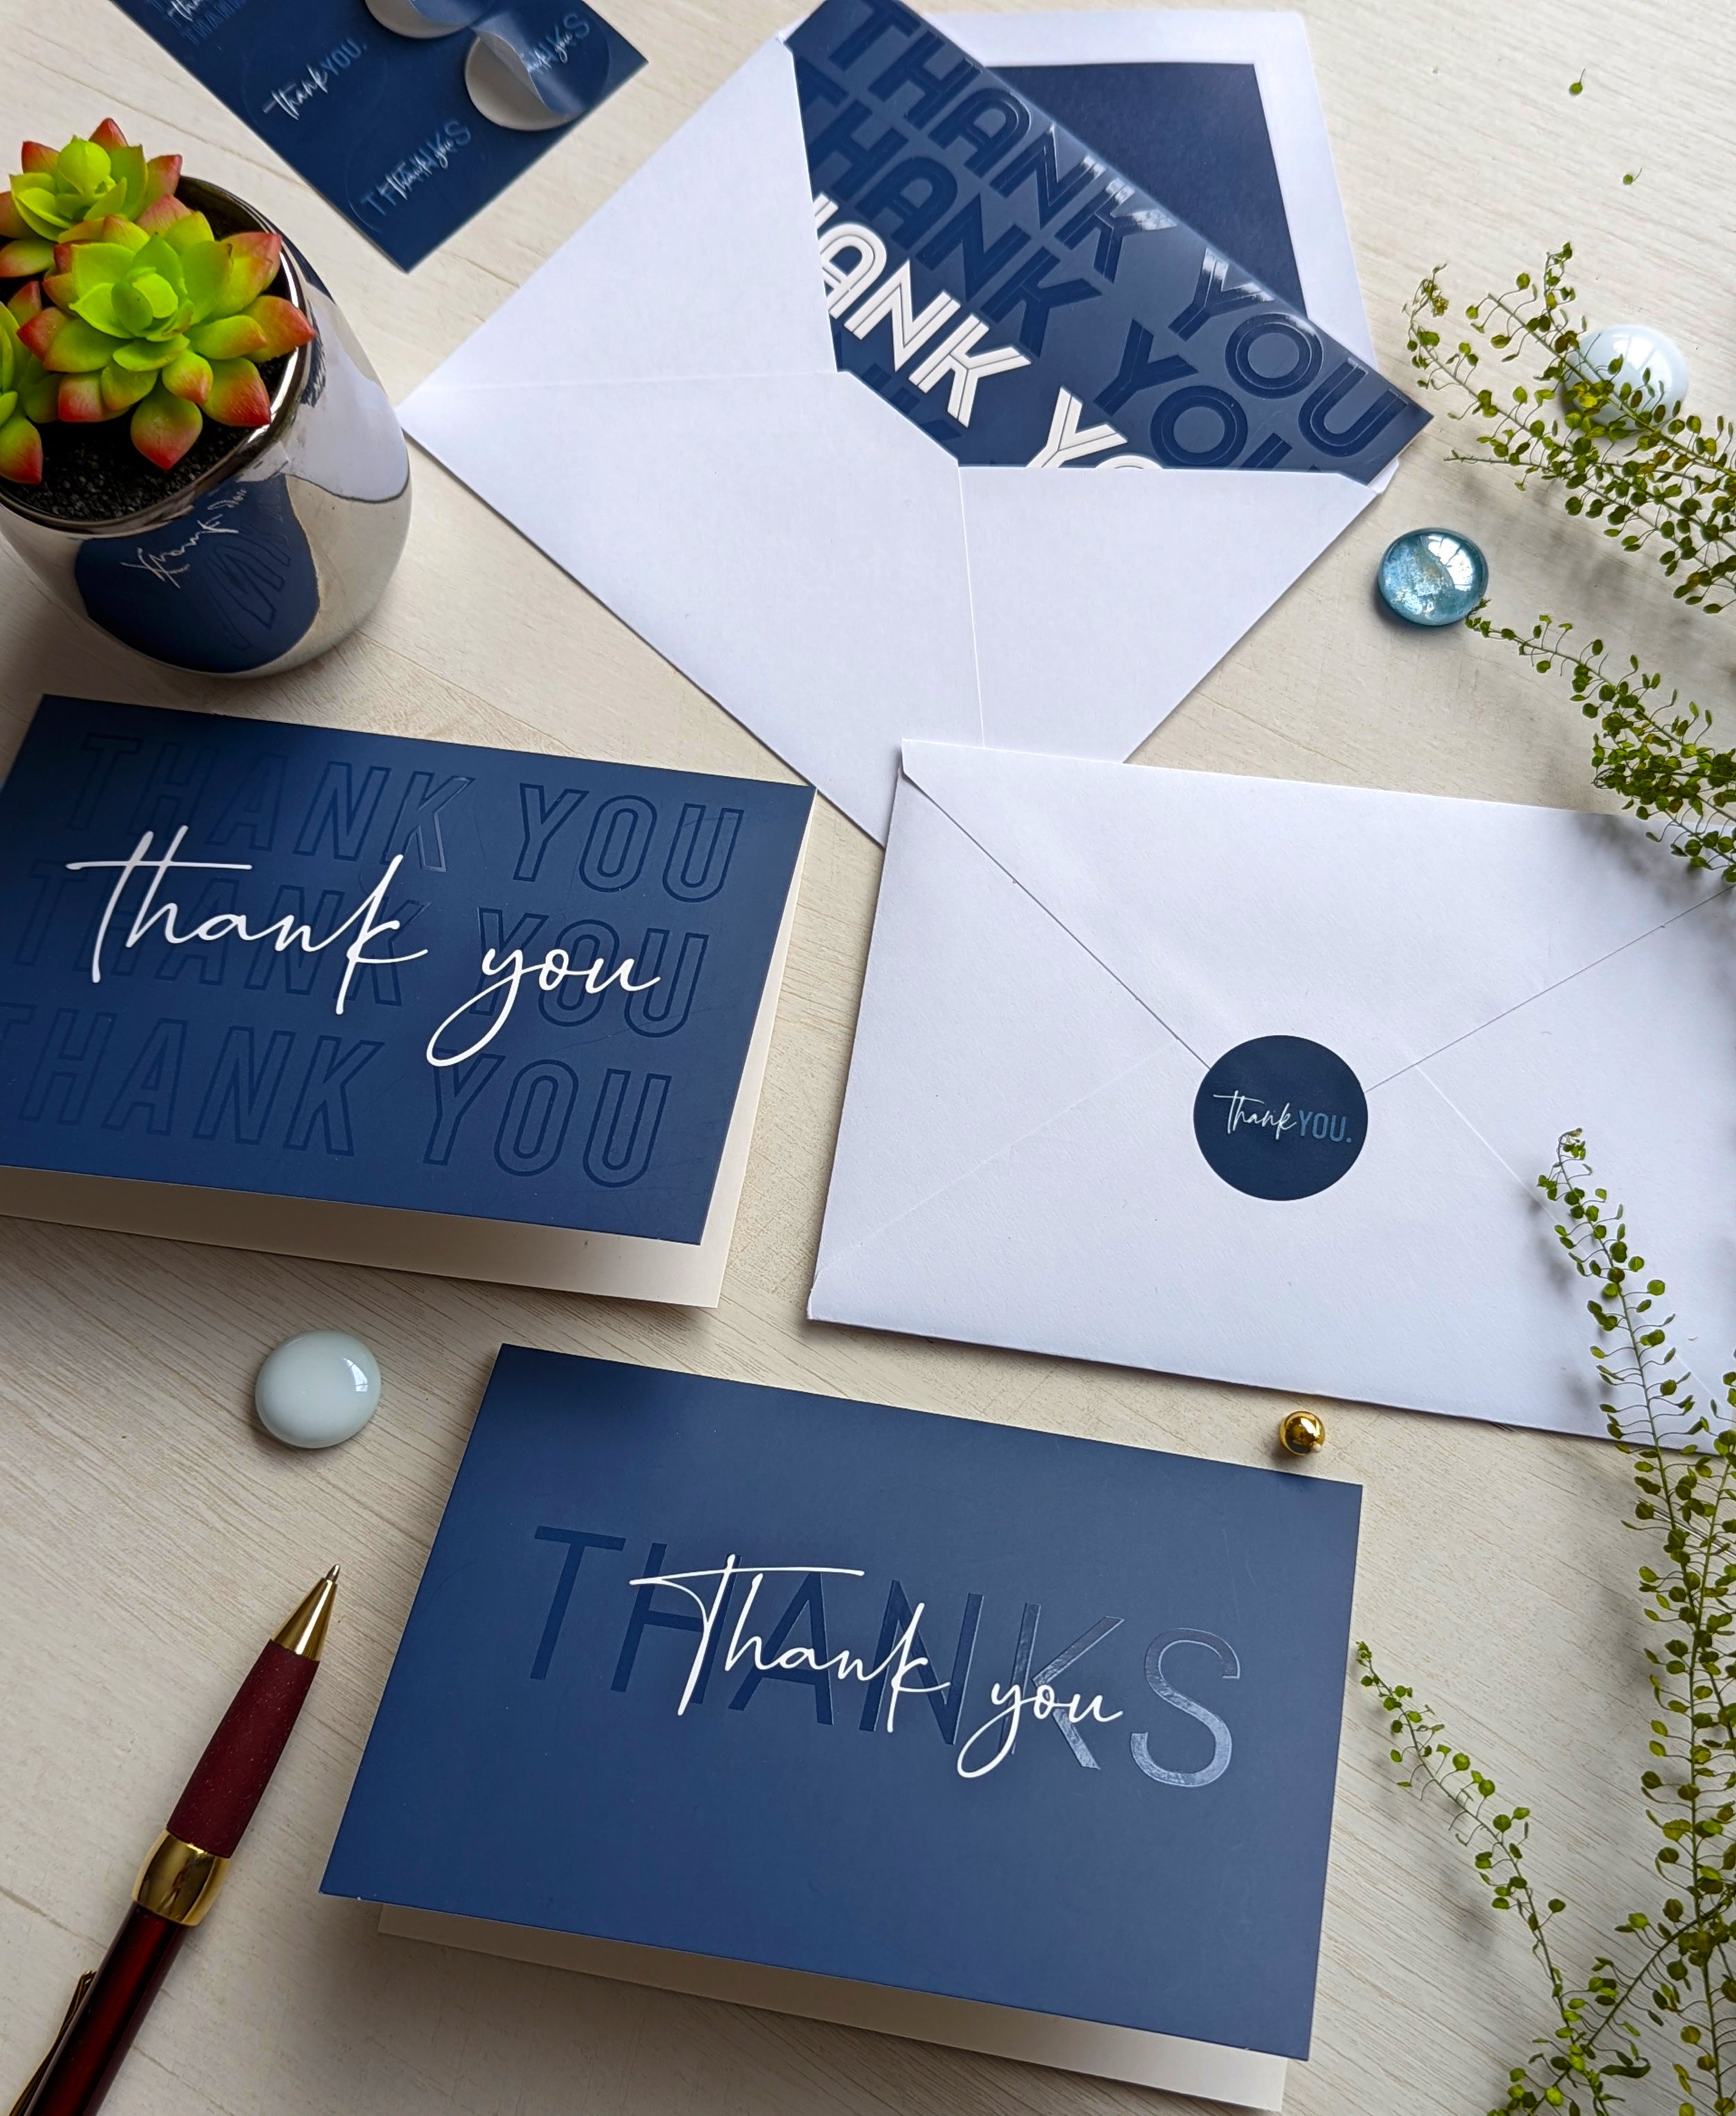 100 Thank You Cards with Envelopes and Stickers - 5 Unique Navy